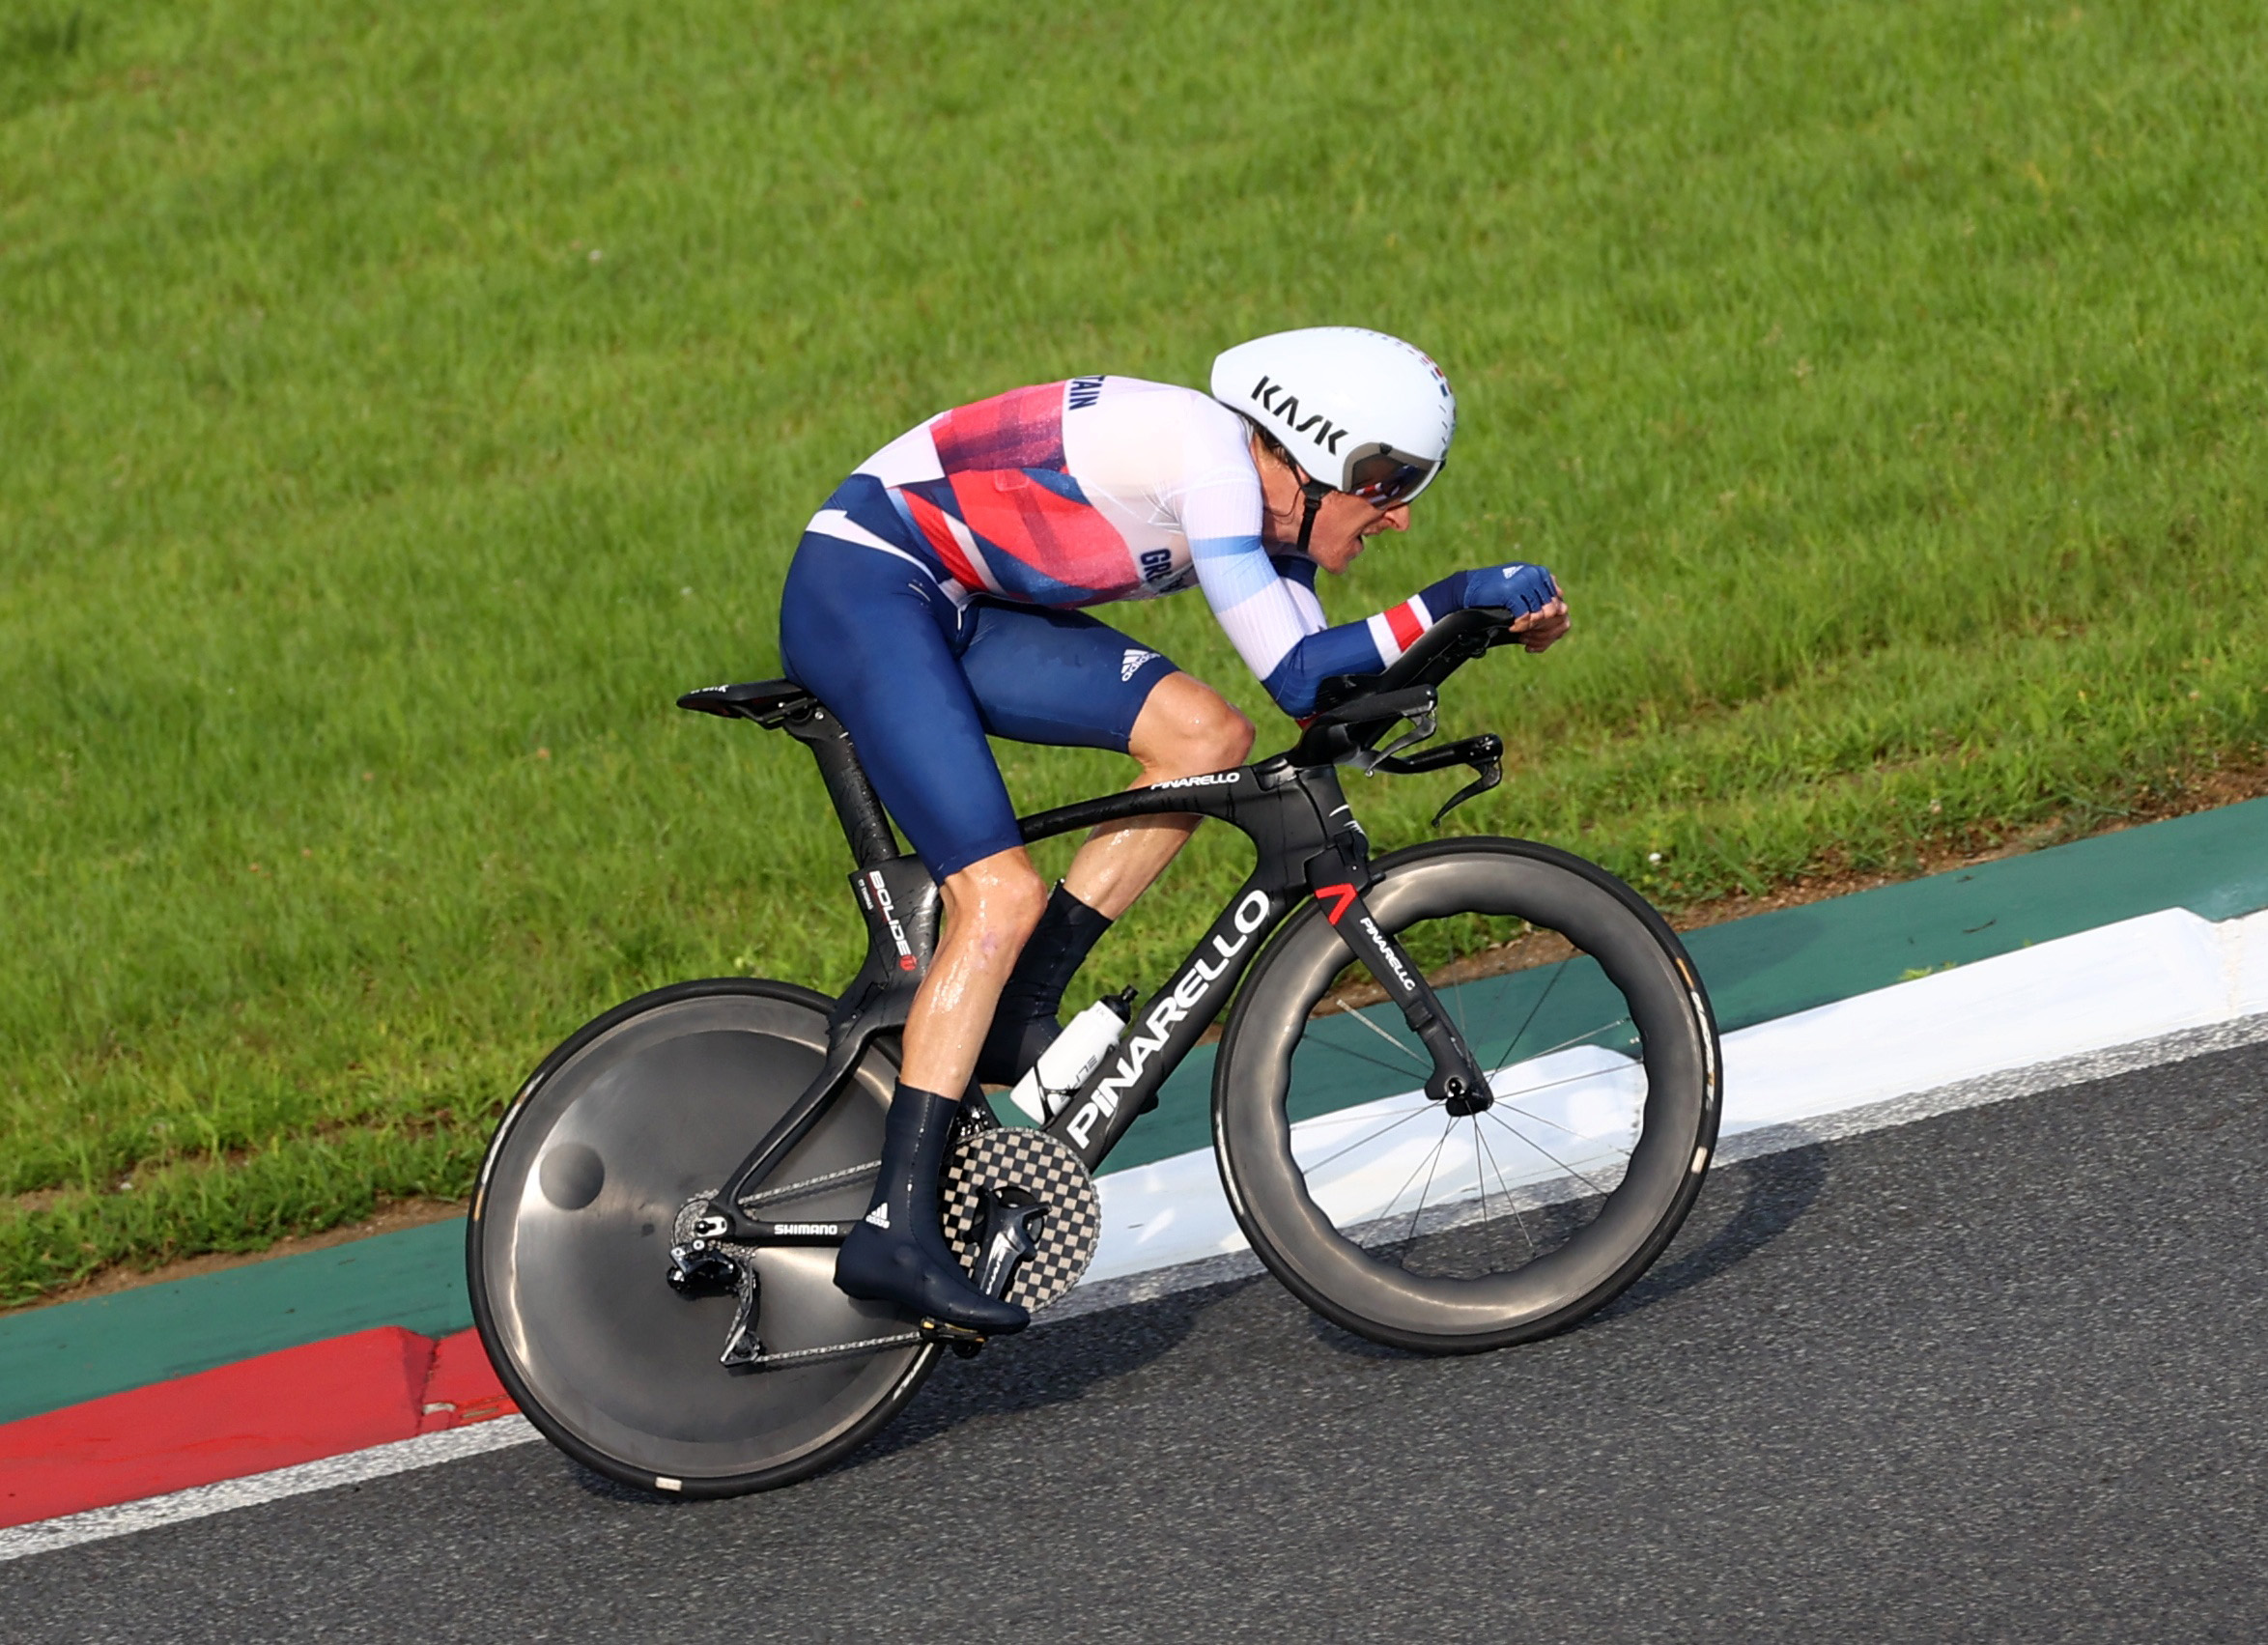 Cycling - Road - Men's Individual Time Trial - Final